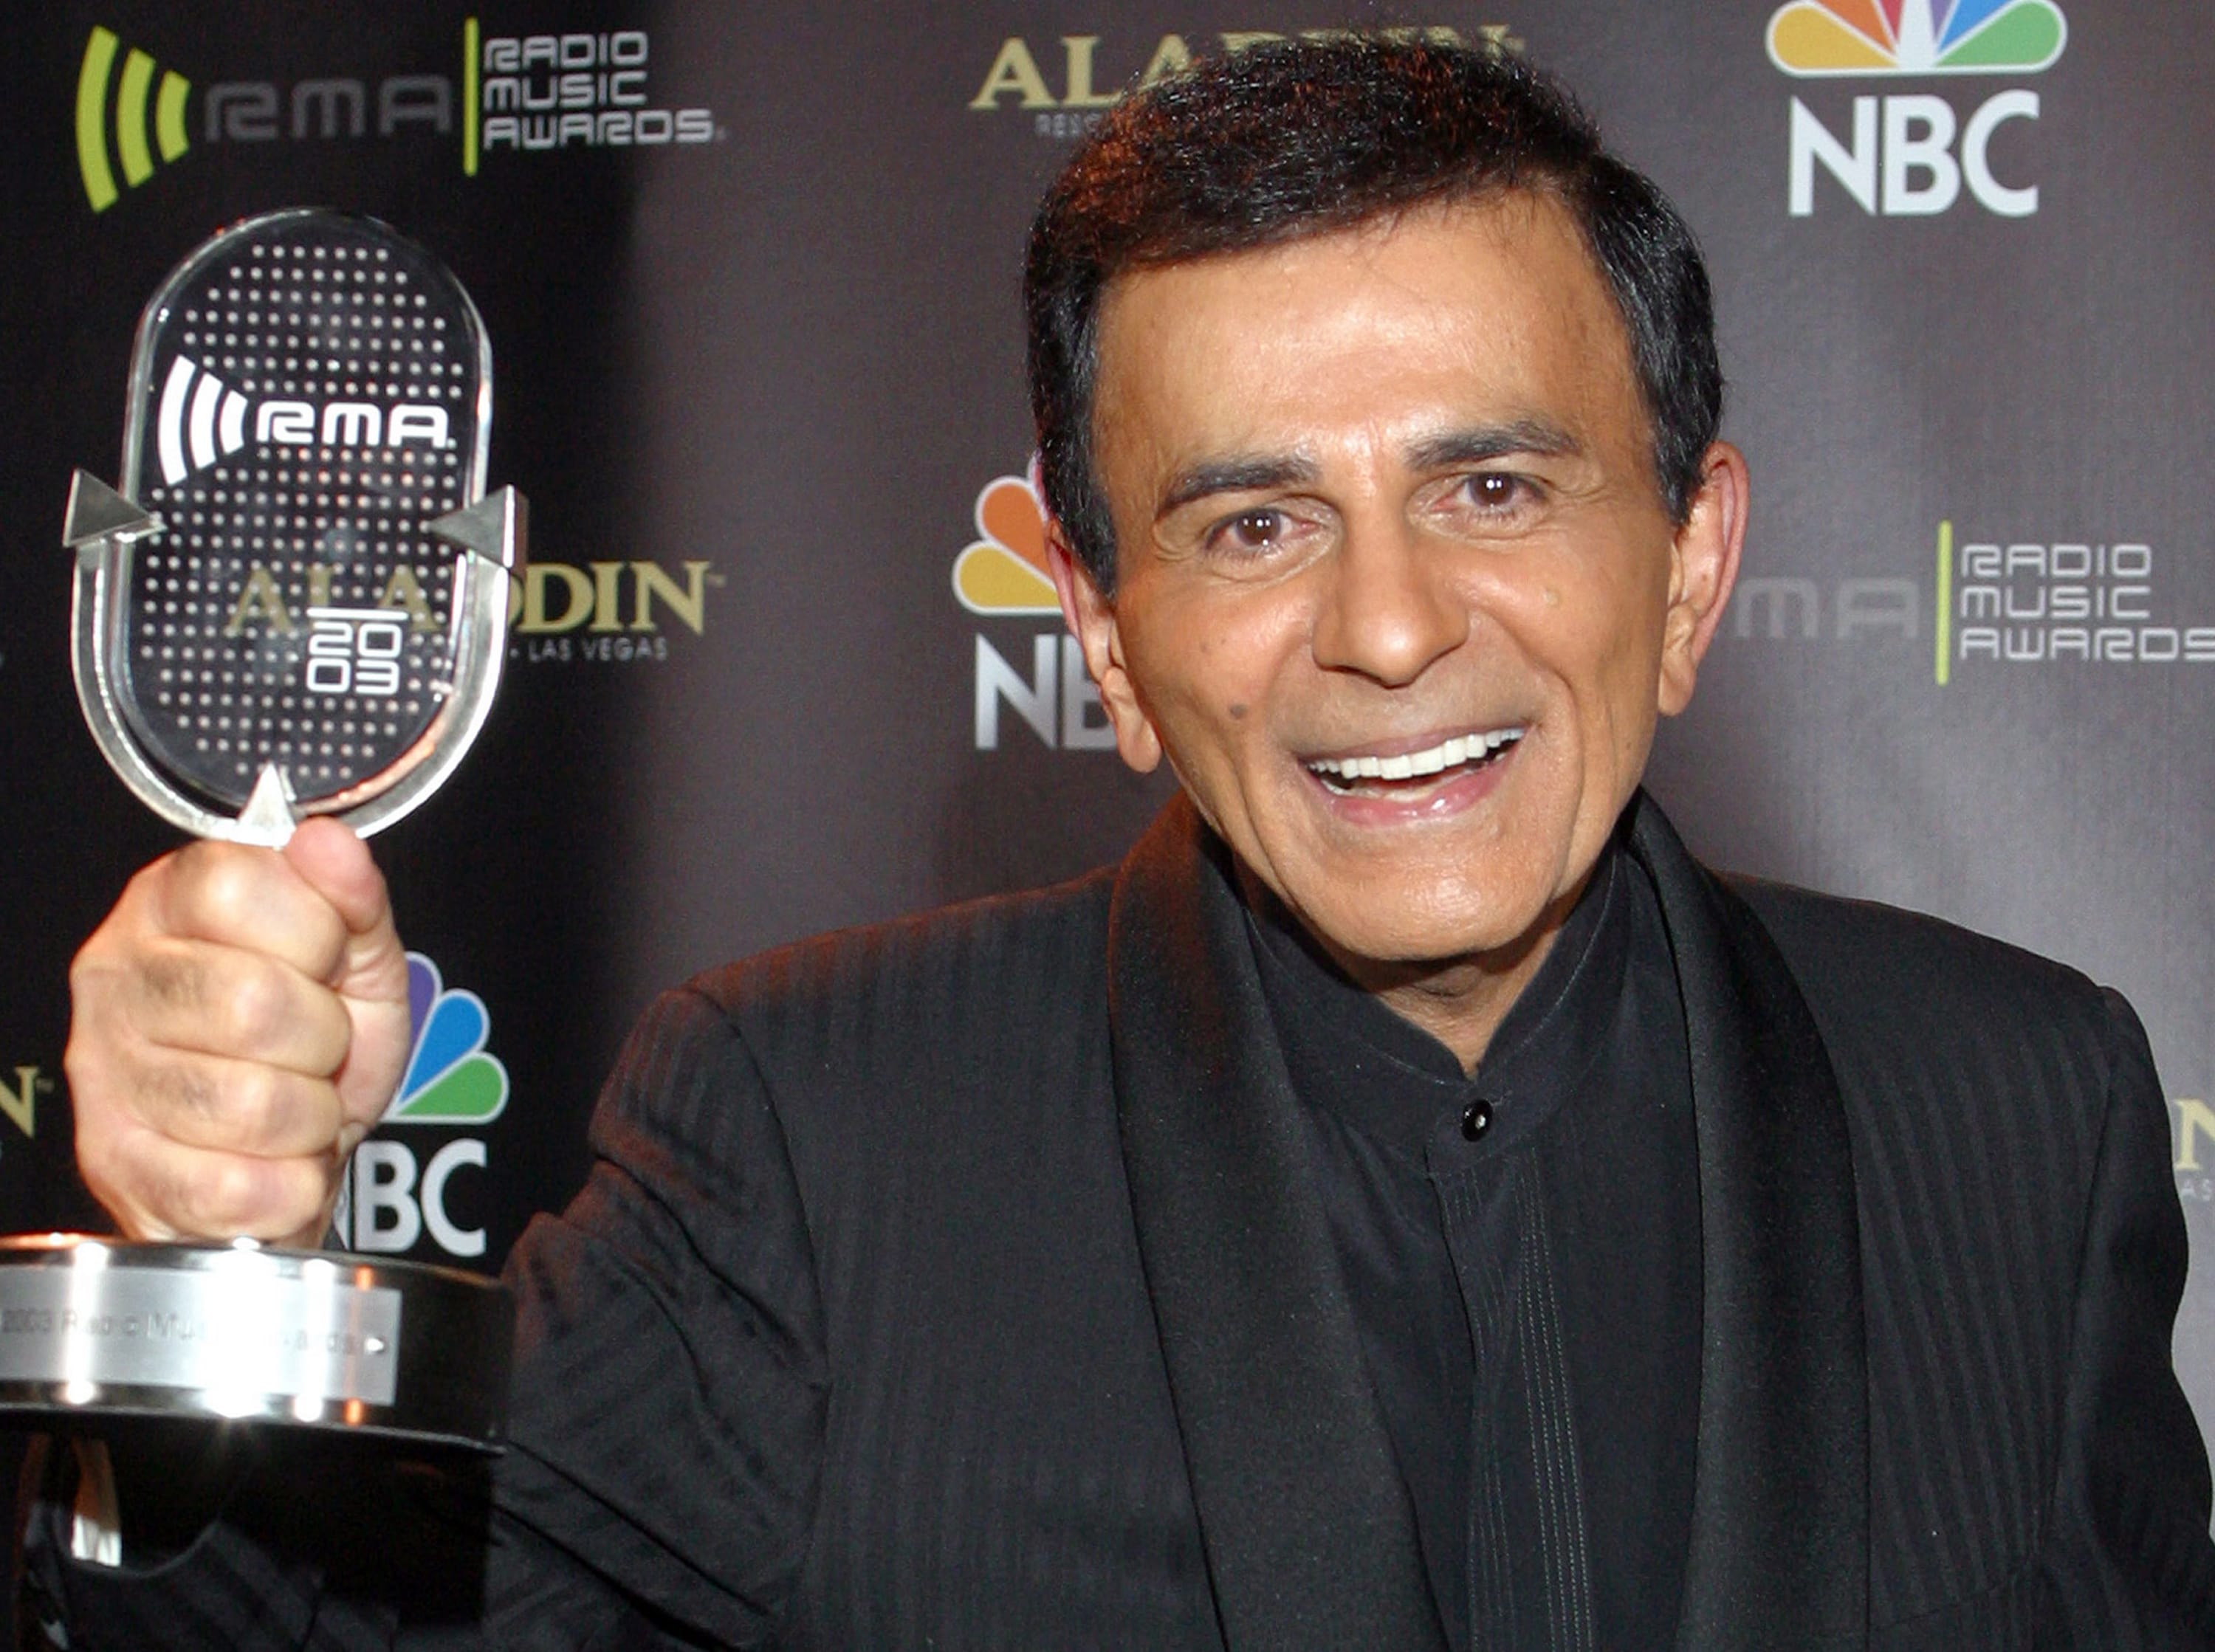 Casey Kasem poses for photographers after receiving the Radio Icon award during The 2003 Radio Music Awards in Las Vegas in 2003.